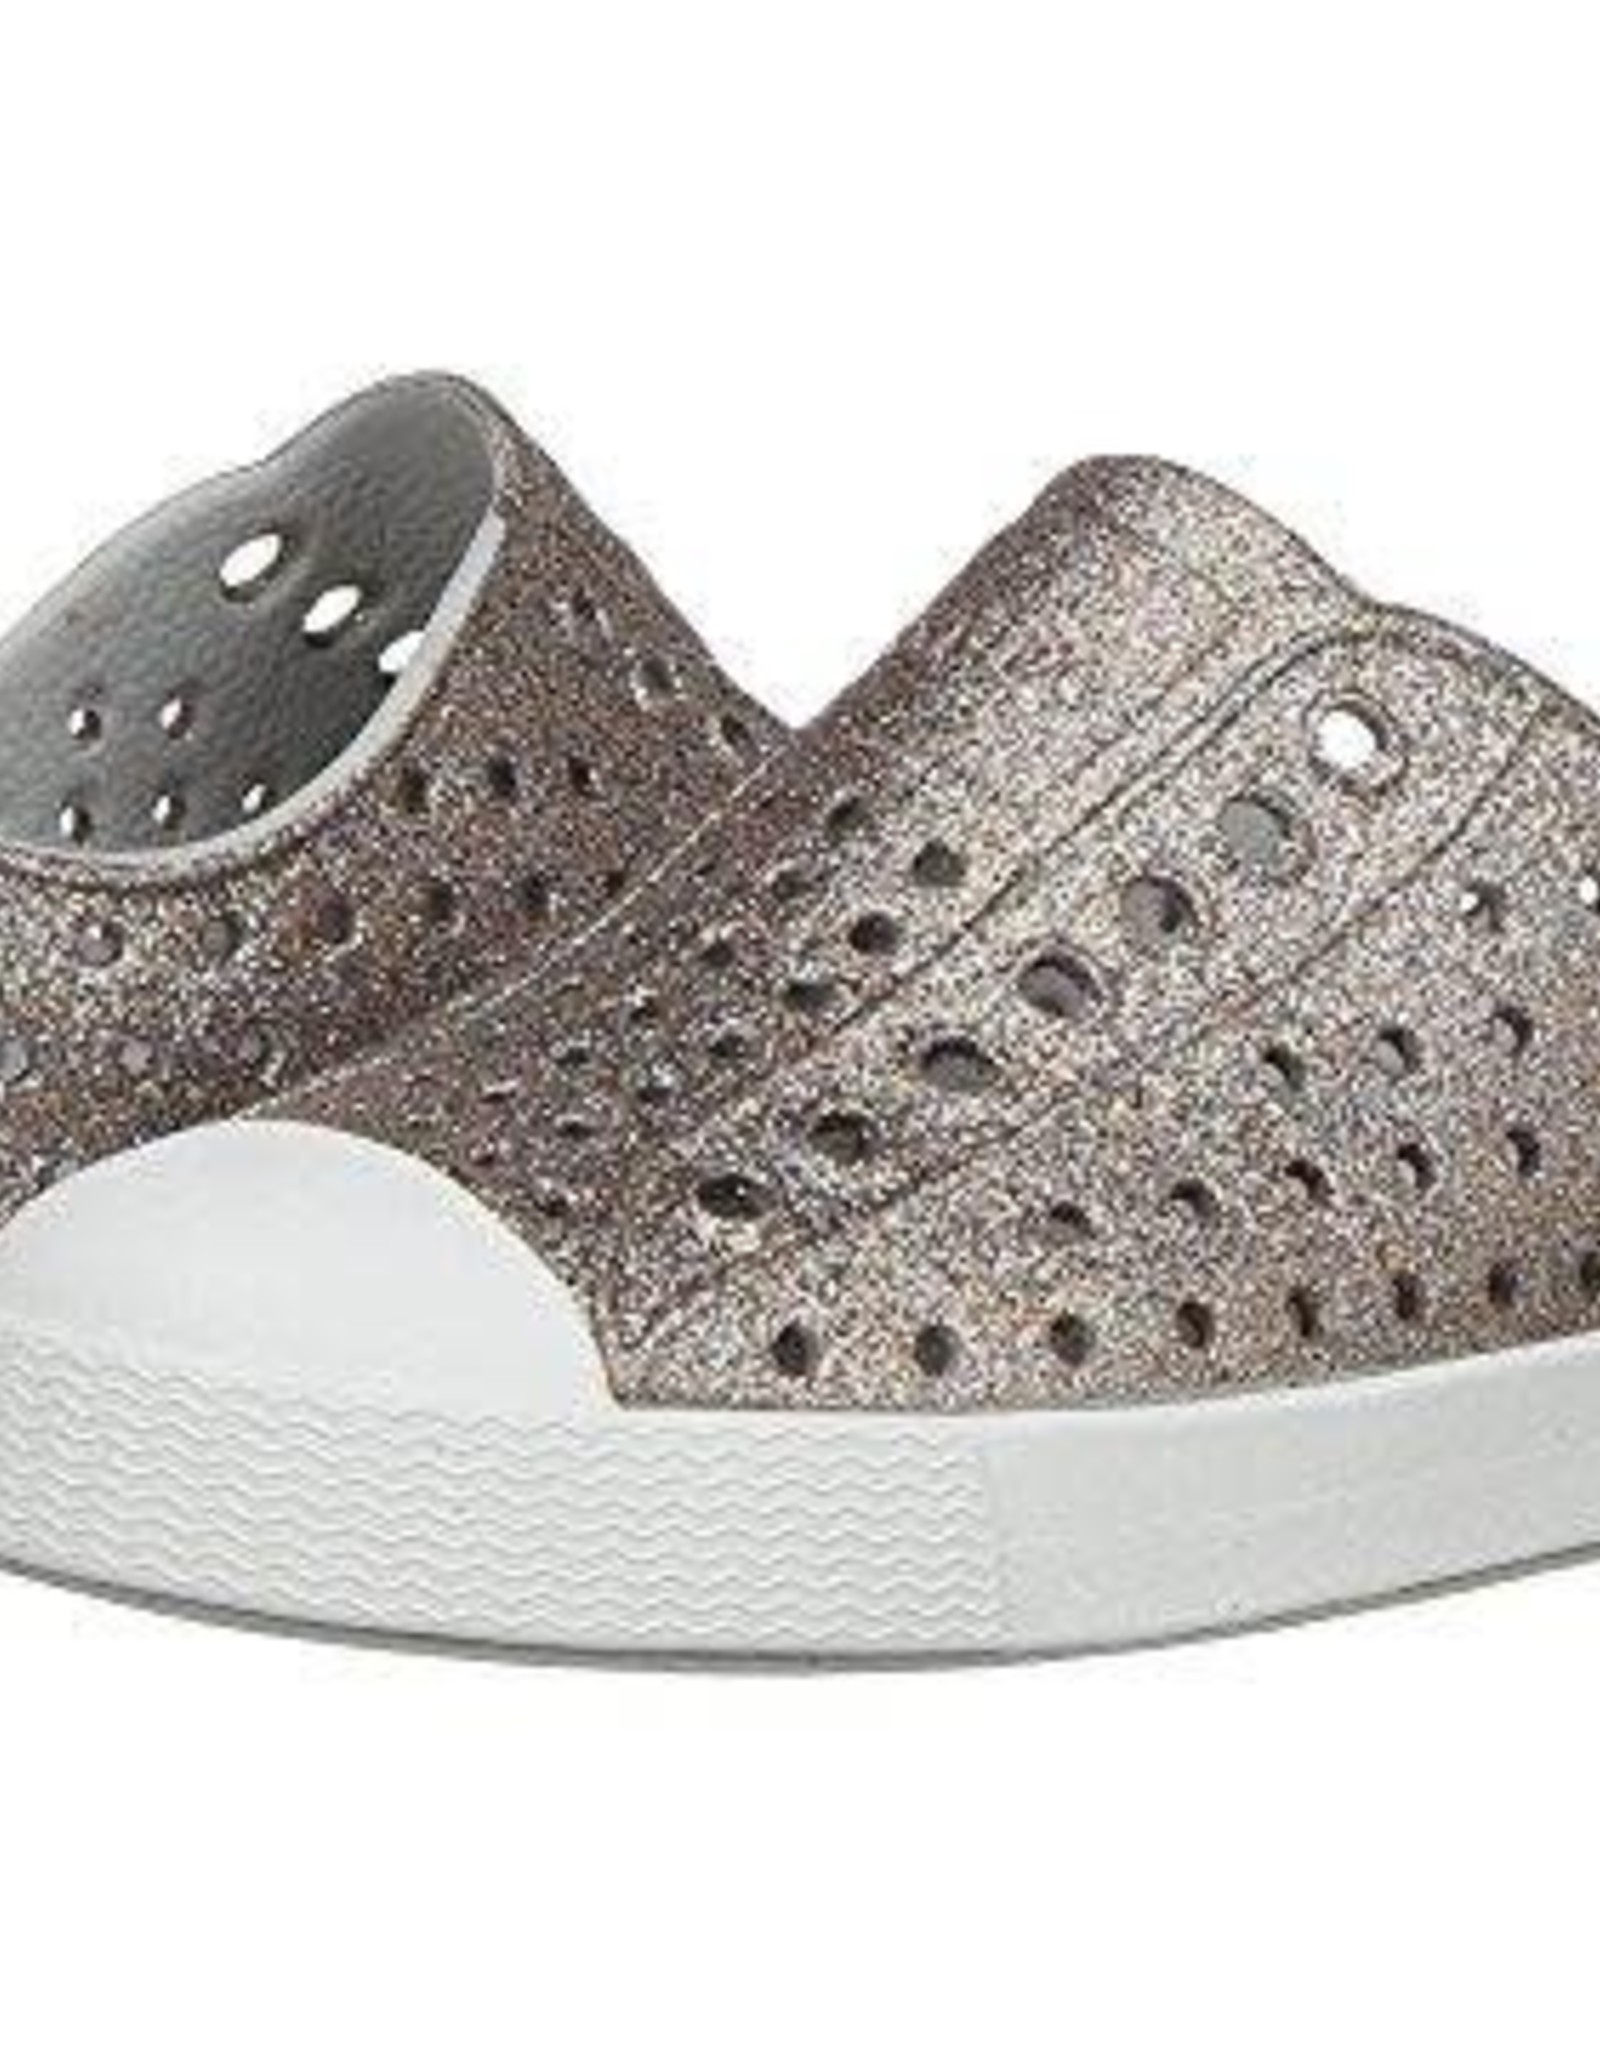 Native Shoes Jefferson in Metal Bling/Shell White - Marlee Janes